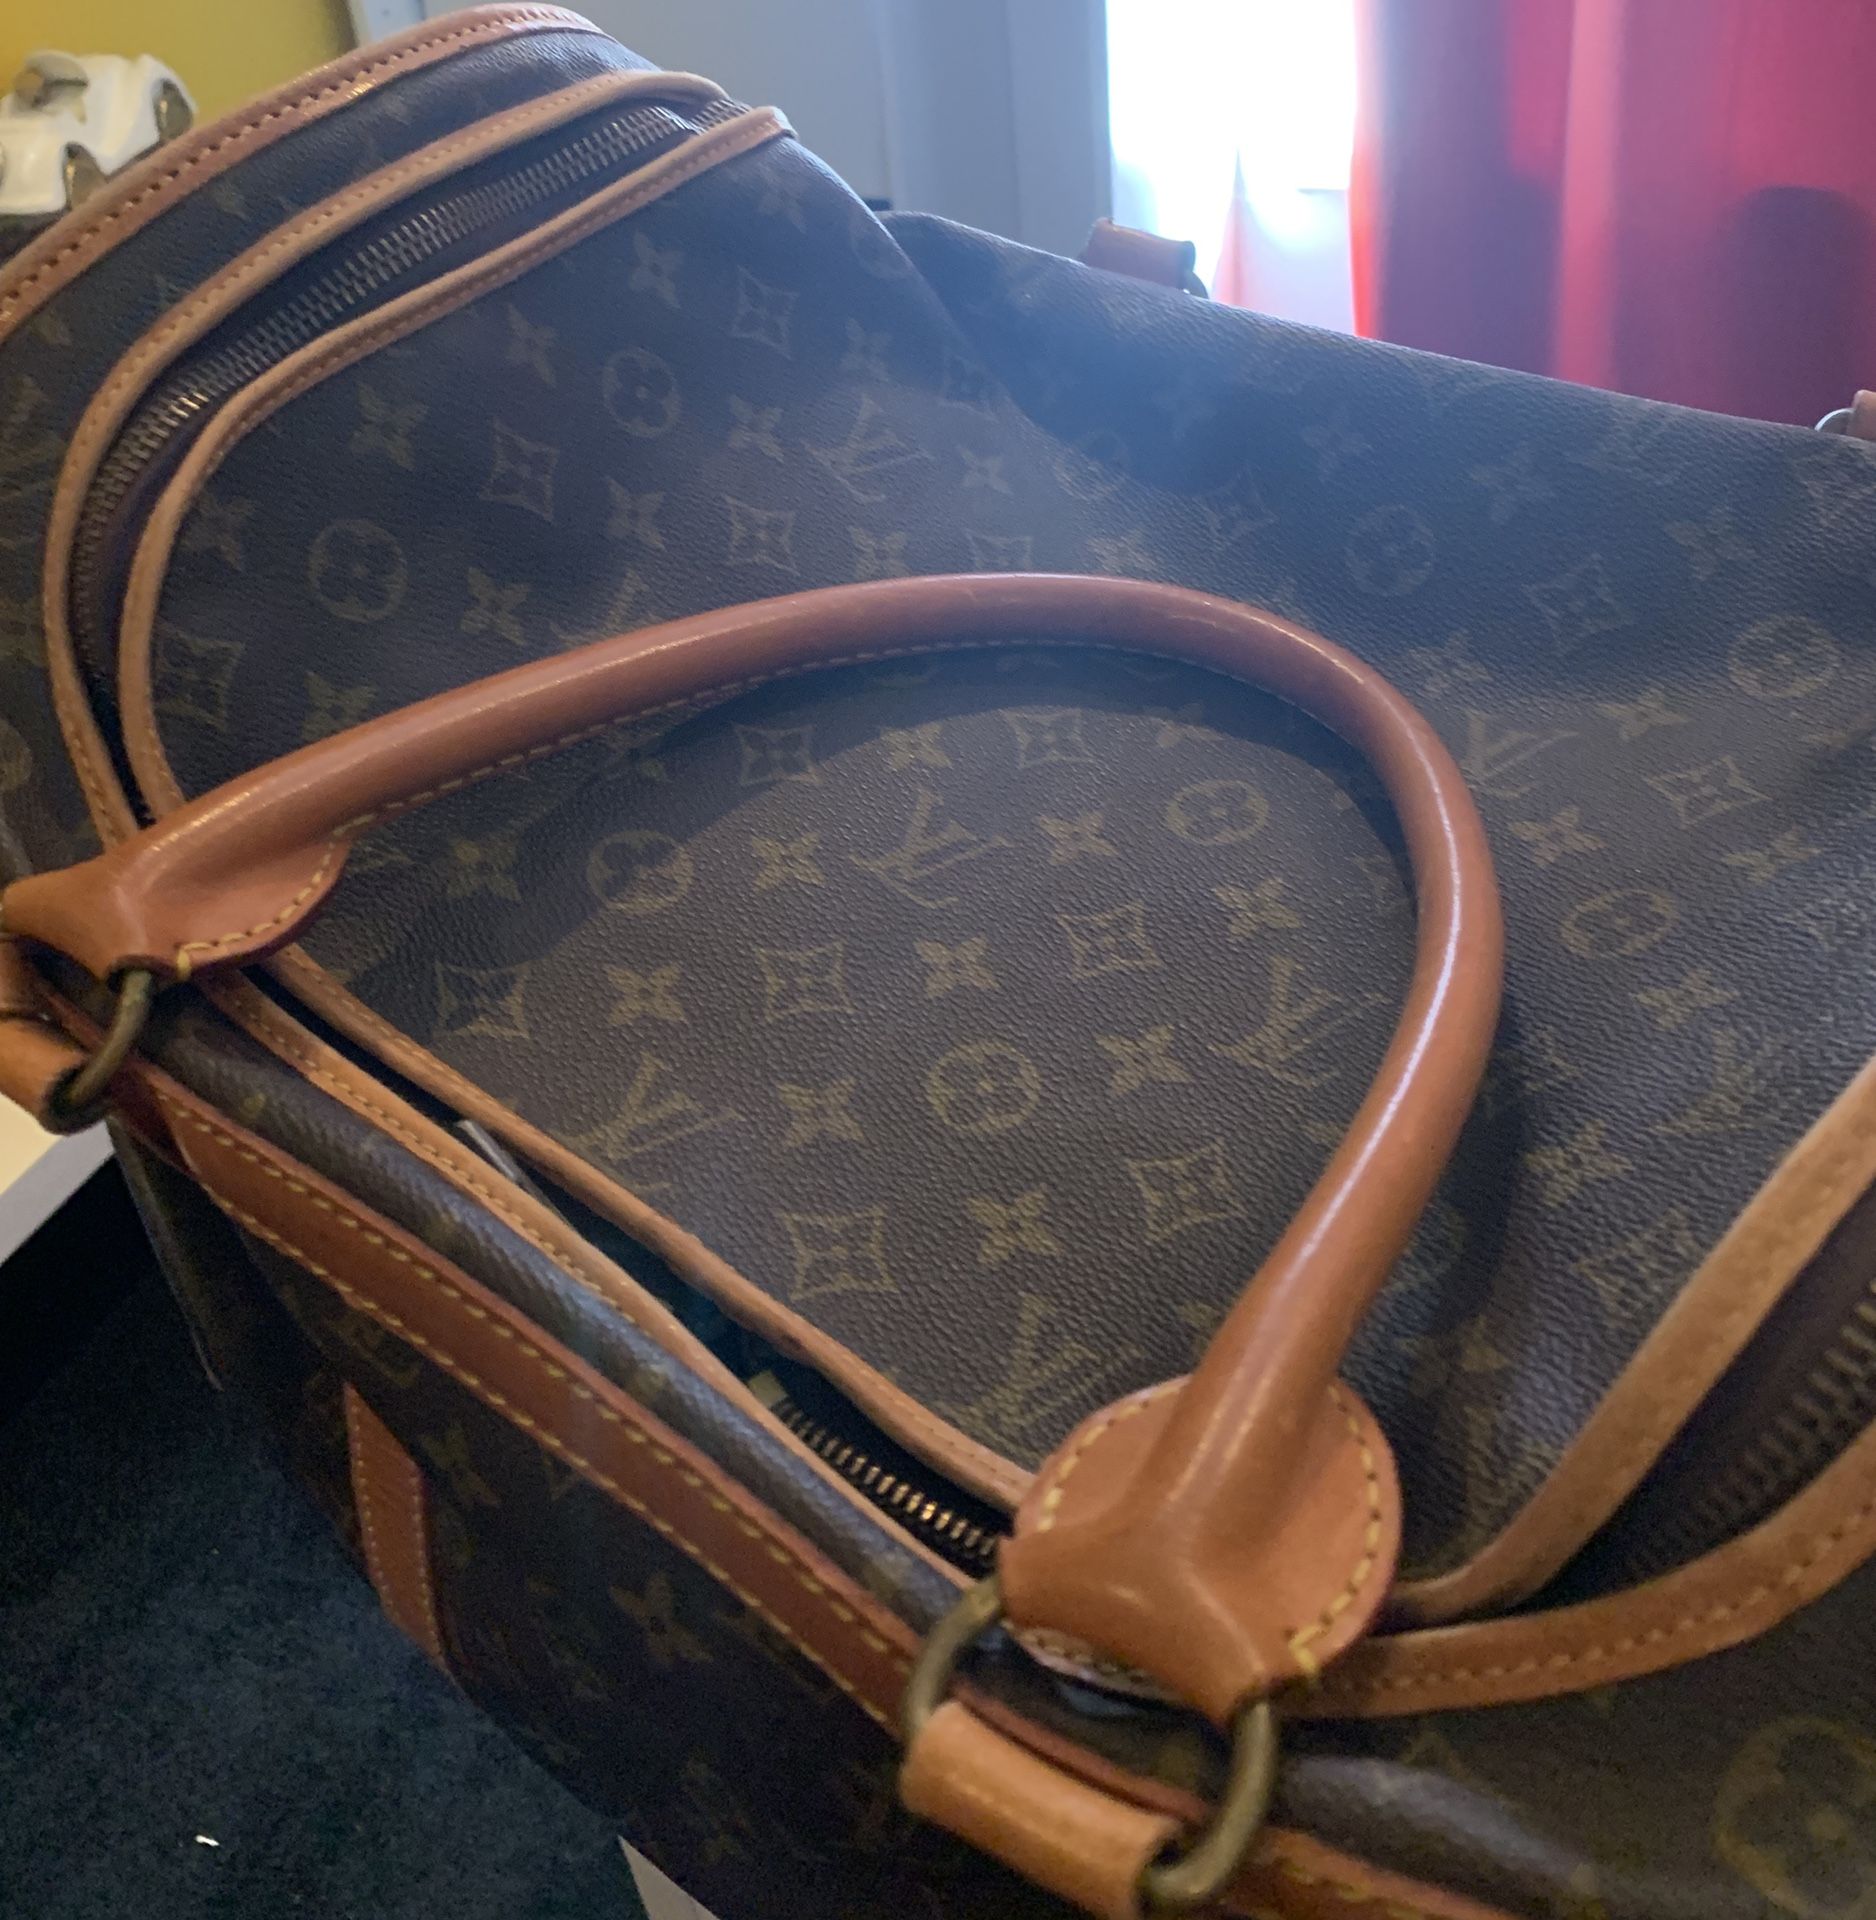 LOUIS VUITTON LUGGAGE 🧳 PIECE FOR SALE SERIOUS INQUIRES ONLY. THIS IS A VINTAGE PIECE THAT CAN ONLY BE APPRECIATED BY SOMEONE WHOM KNOW GOOD LOUIS VU